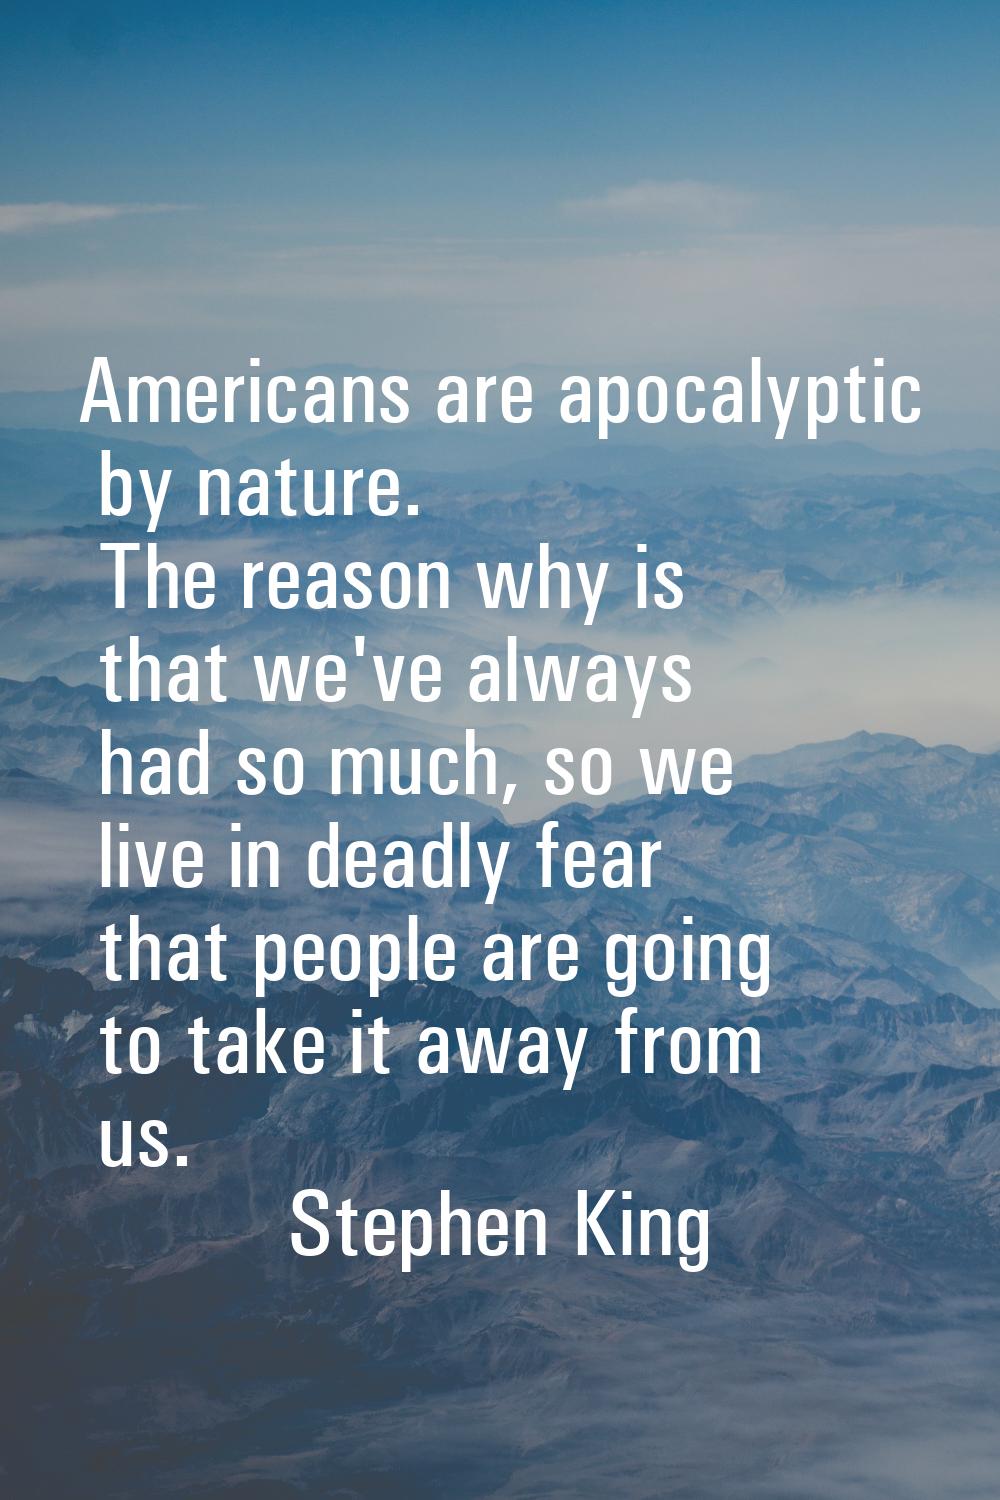 Americans are apocalyptic by nature. The reason why is that we've always had so much, so we live in